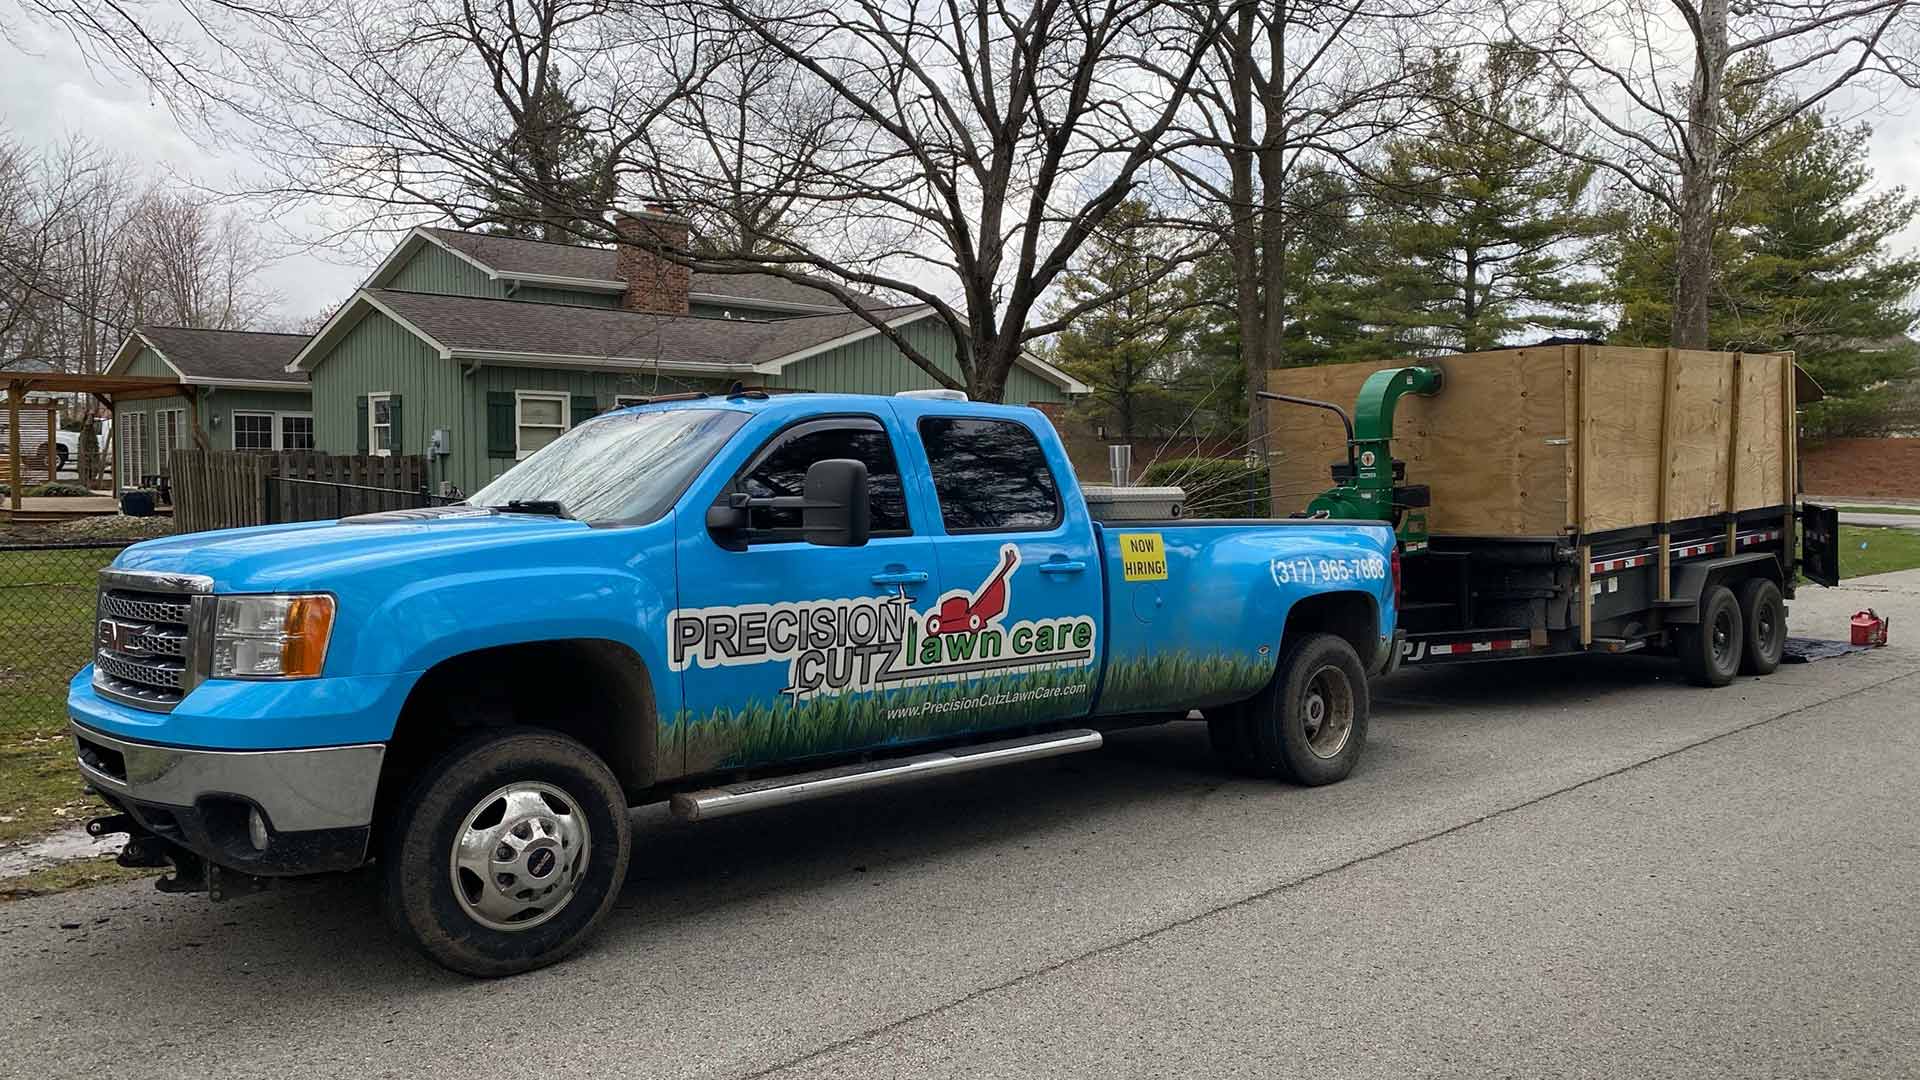 Precision Cutz Lawn Care truck at a property in Fishers, IN.